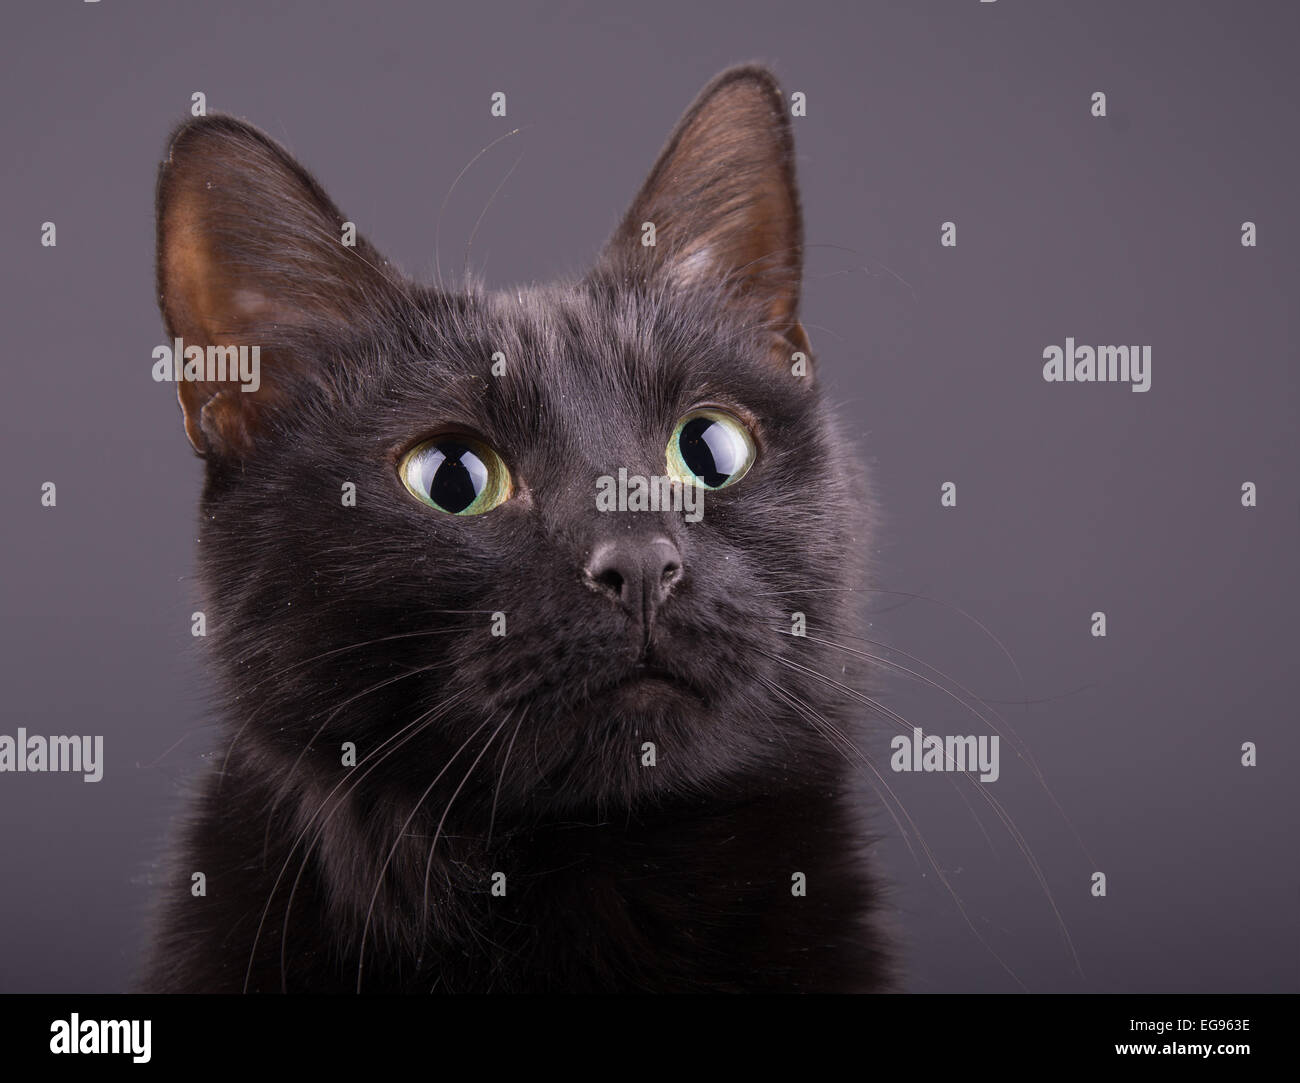 Closeup of an adorable black cat against dark gray background Stock Photo